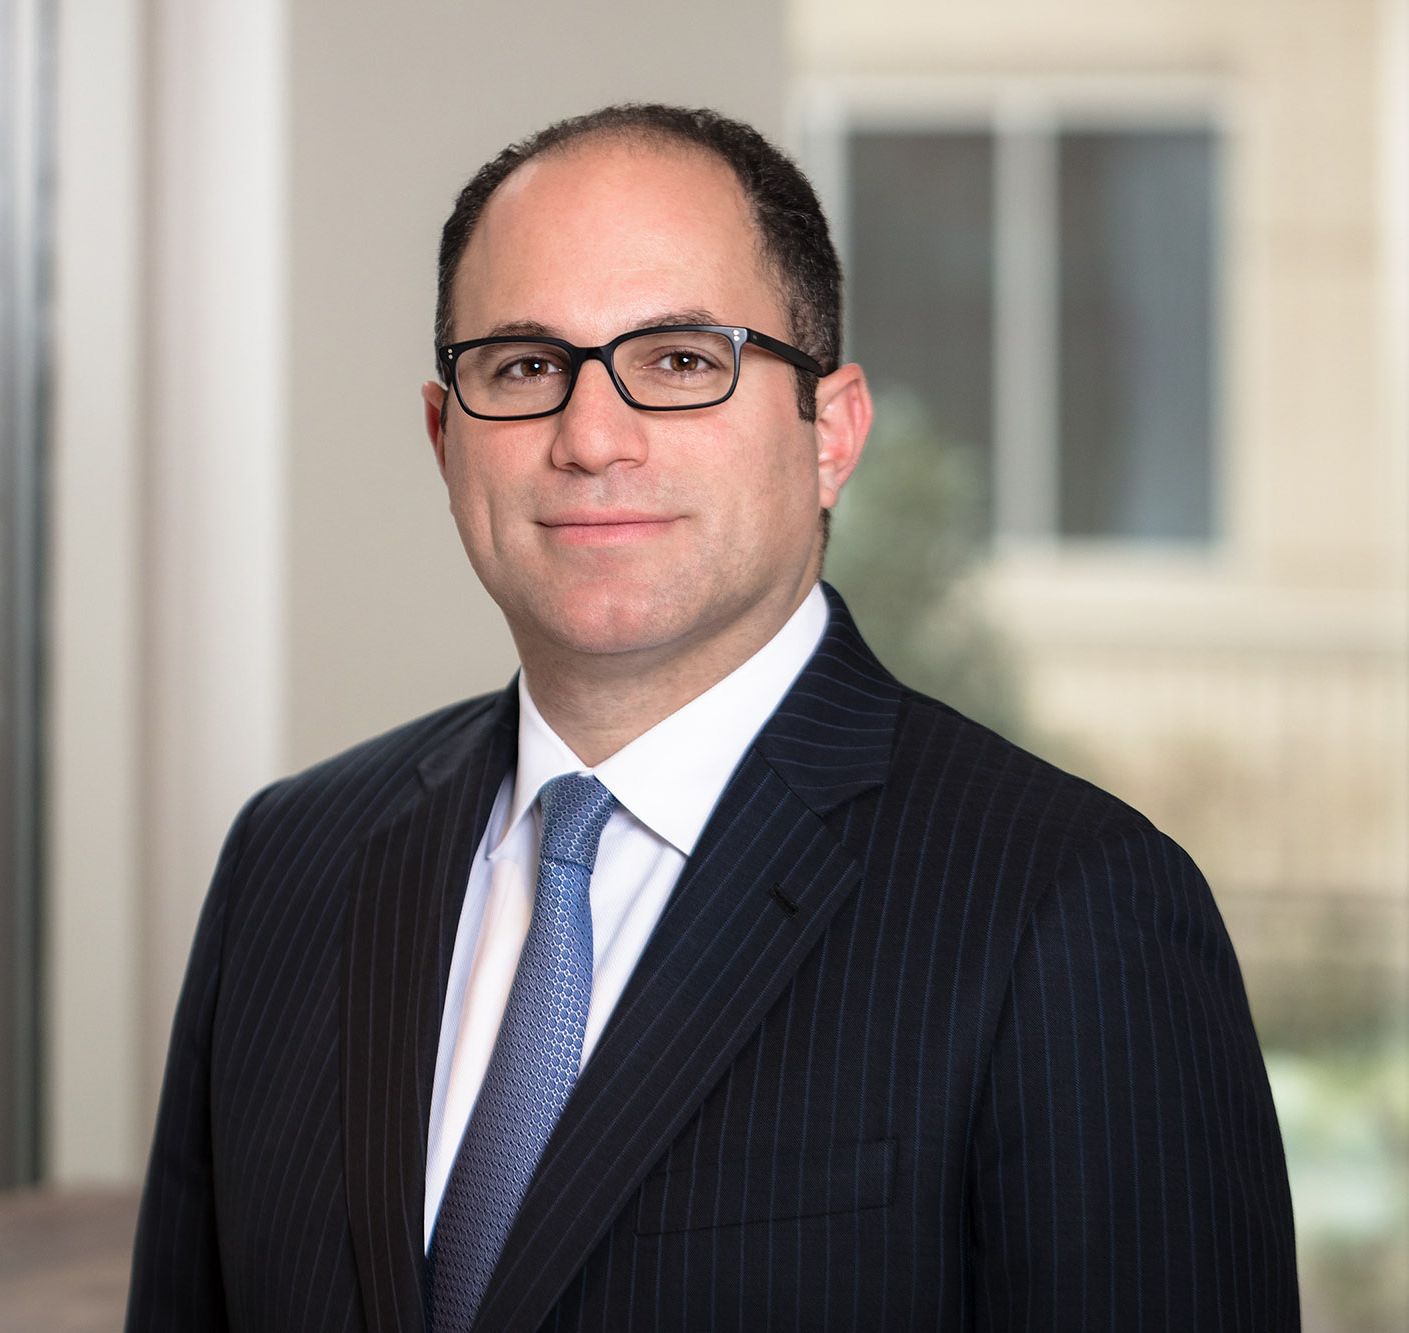 Ira Rothberg is a Portfolio Manager and Managing Member of Broad Run Investment Management